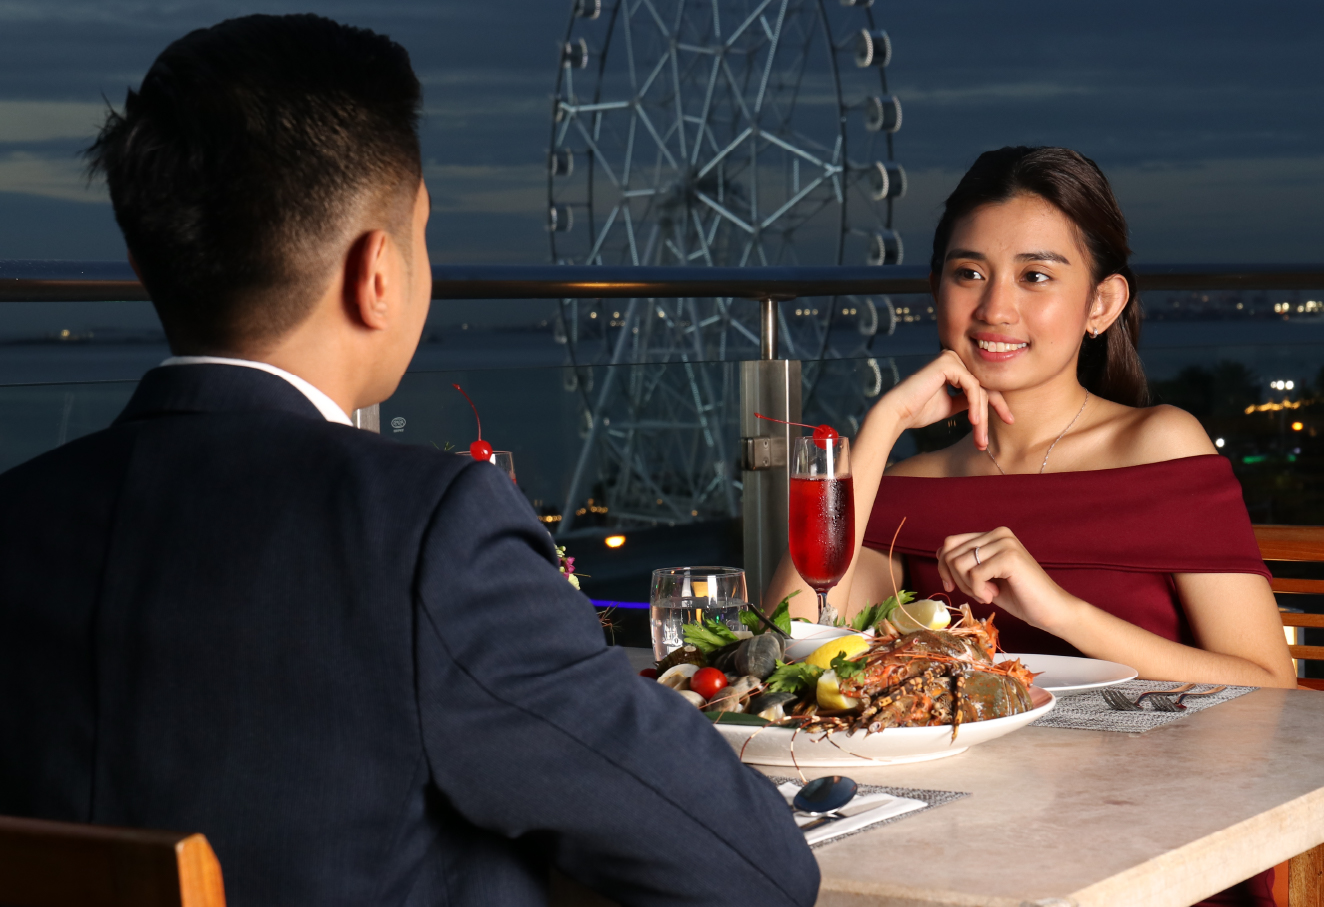 The photo shows a couple looking at each other. The man's back is facing the camera and the woman is looking at the man. Both of them are dressed in formal attire; the man is wearing a dark blue blazer and the woman is wearing an off-shoulder red dress. On the table, there is a plate of fresh seafood and a few glasses of drinks.